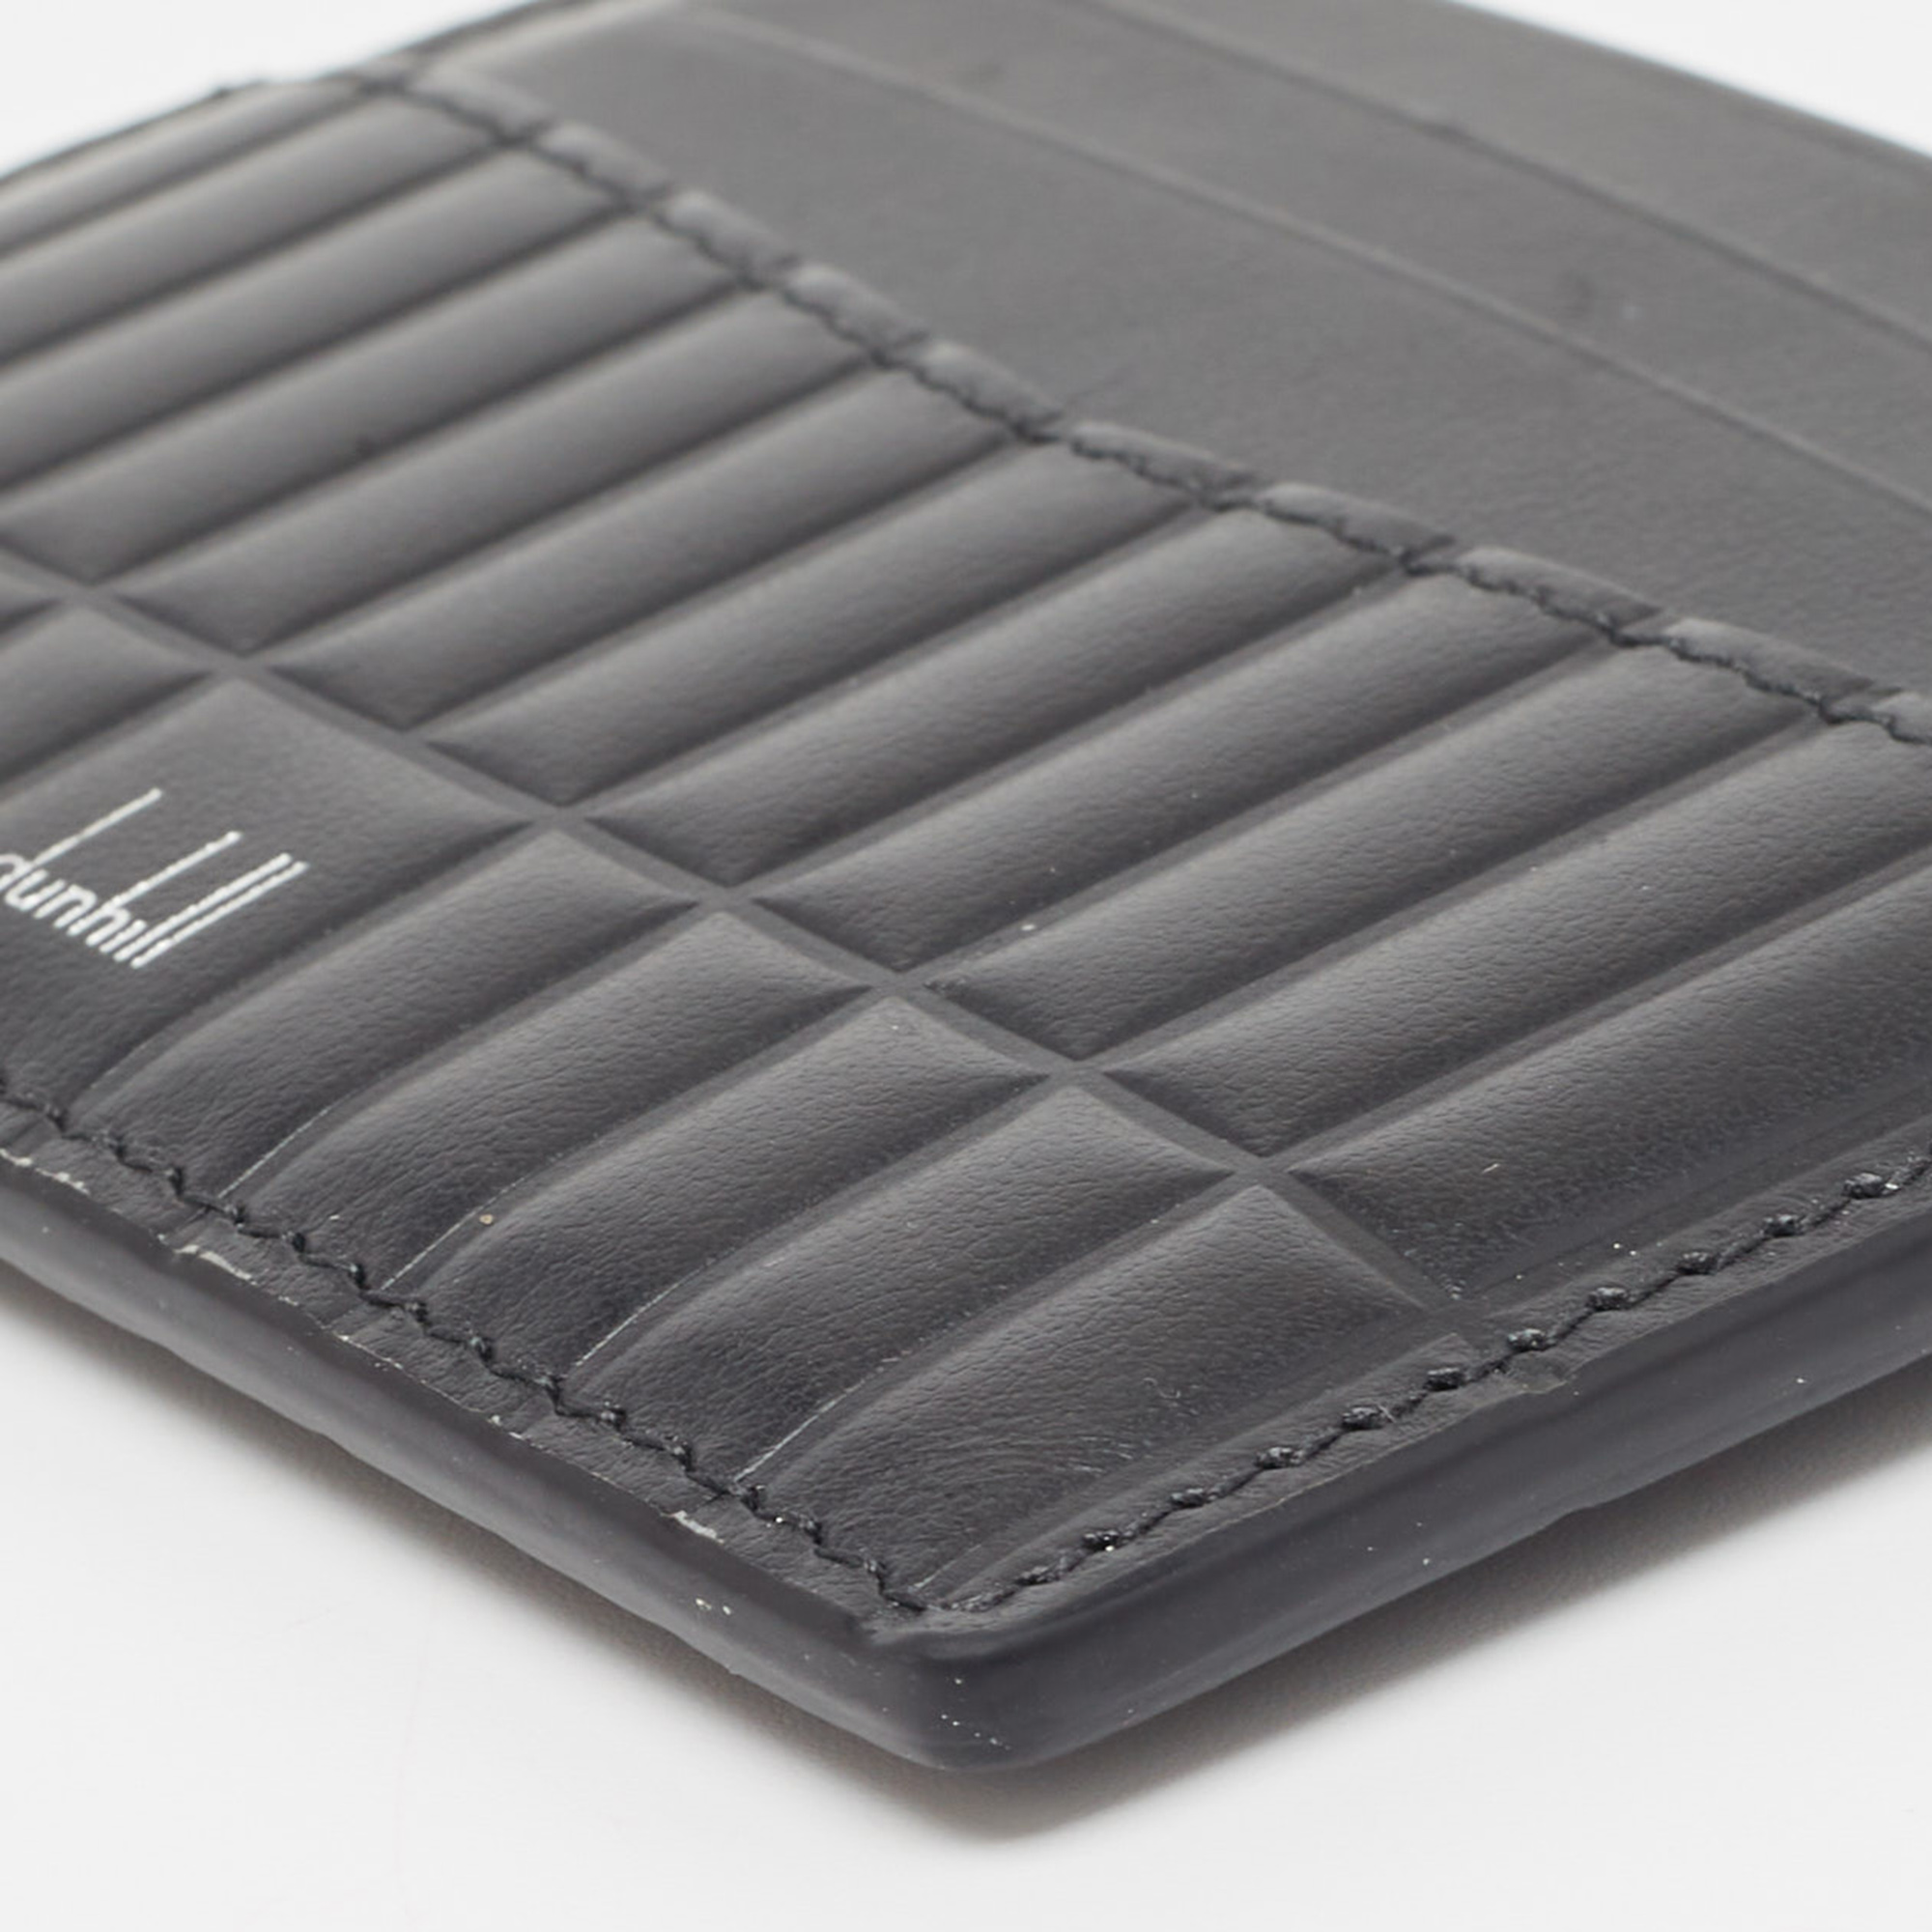 Dunhill Black Debossed Leather Rollagas Card Holder